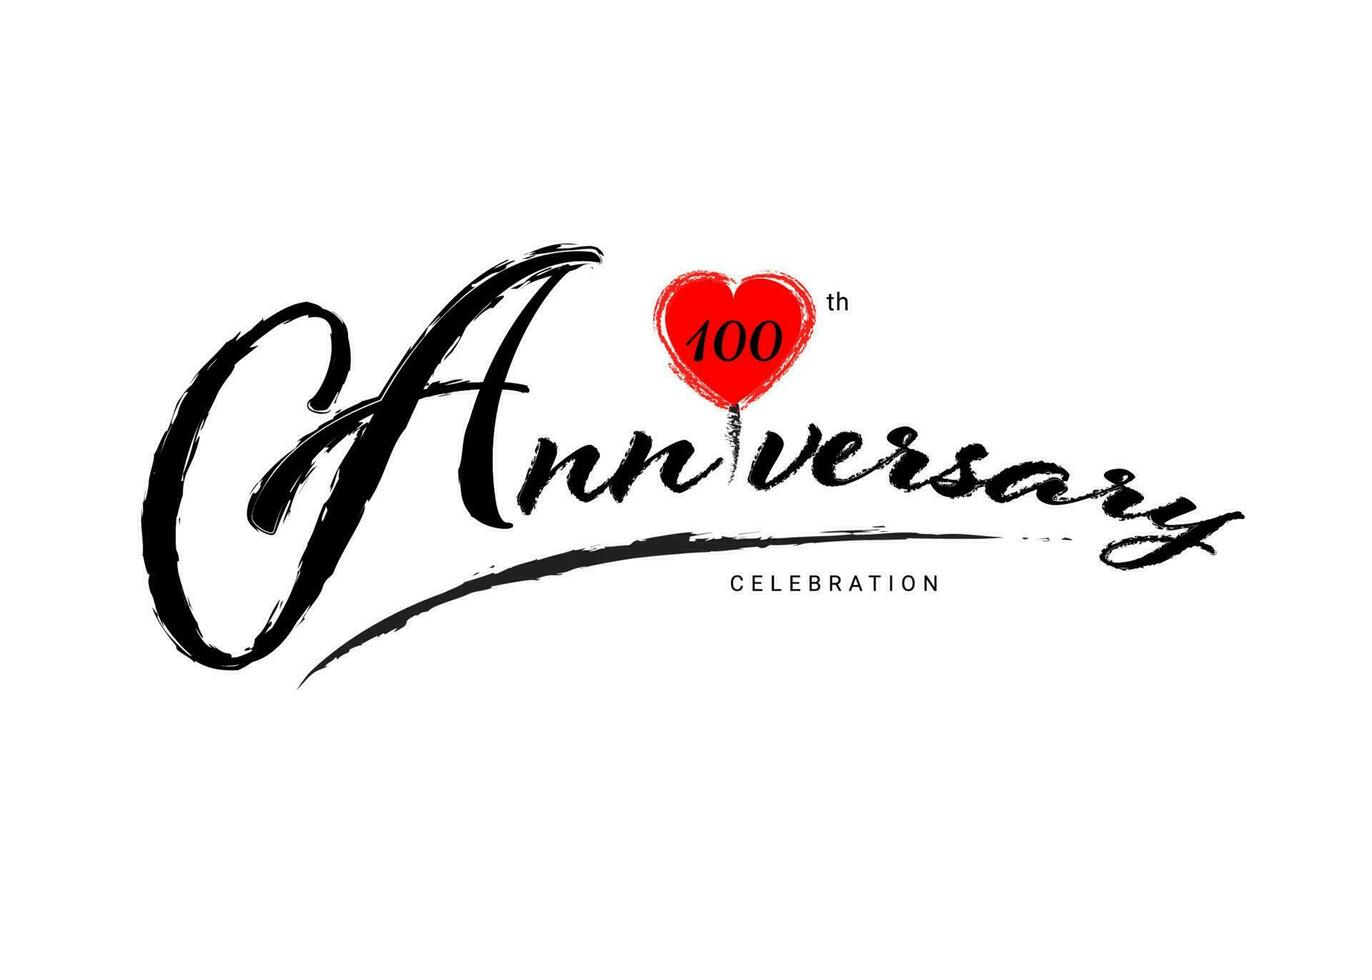 100 Years Anniversary Celebration logo with red heart vector, 100 number logo design, 100th Birthday Logo, happy Anniversary, Vector Anniversary For Celebration, poster, Invitation Card